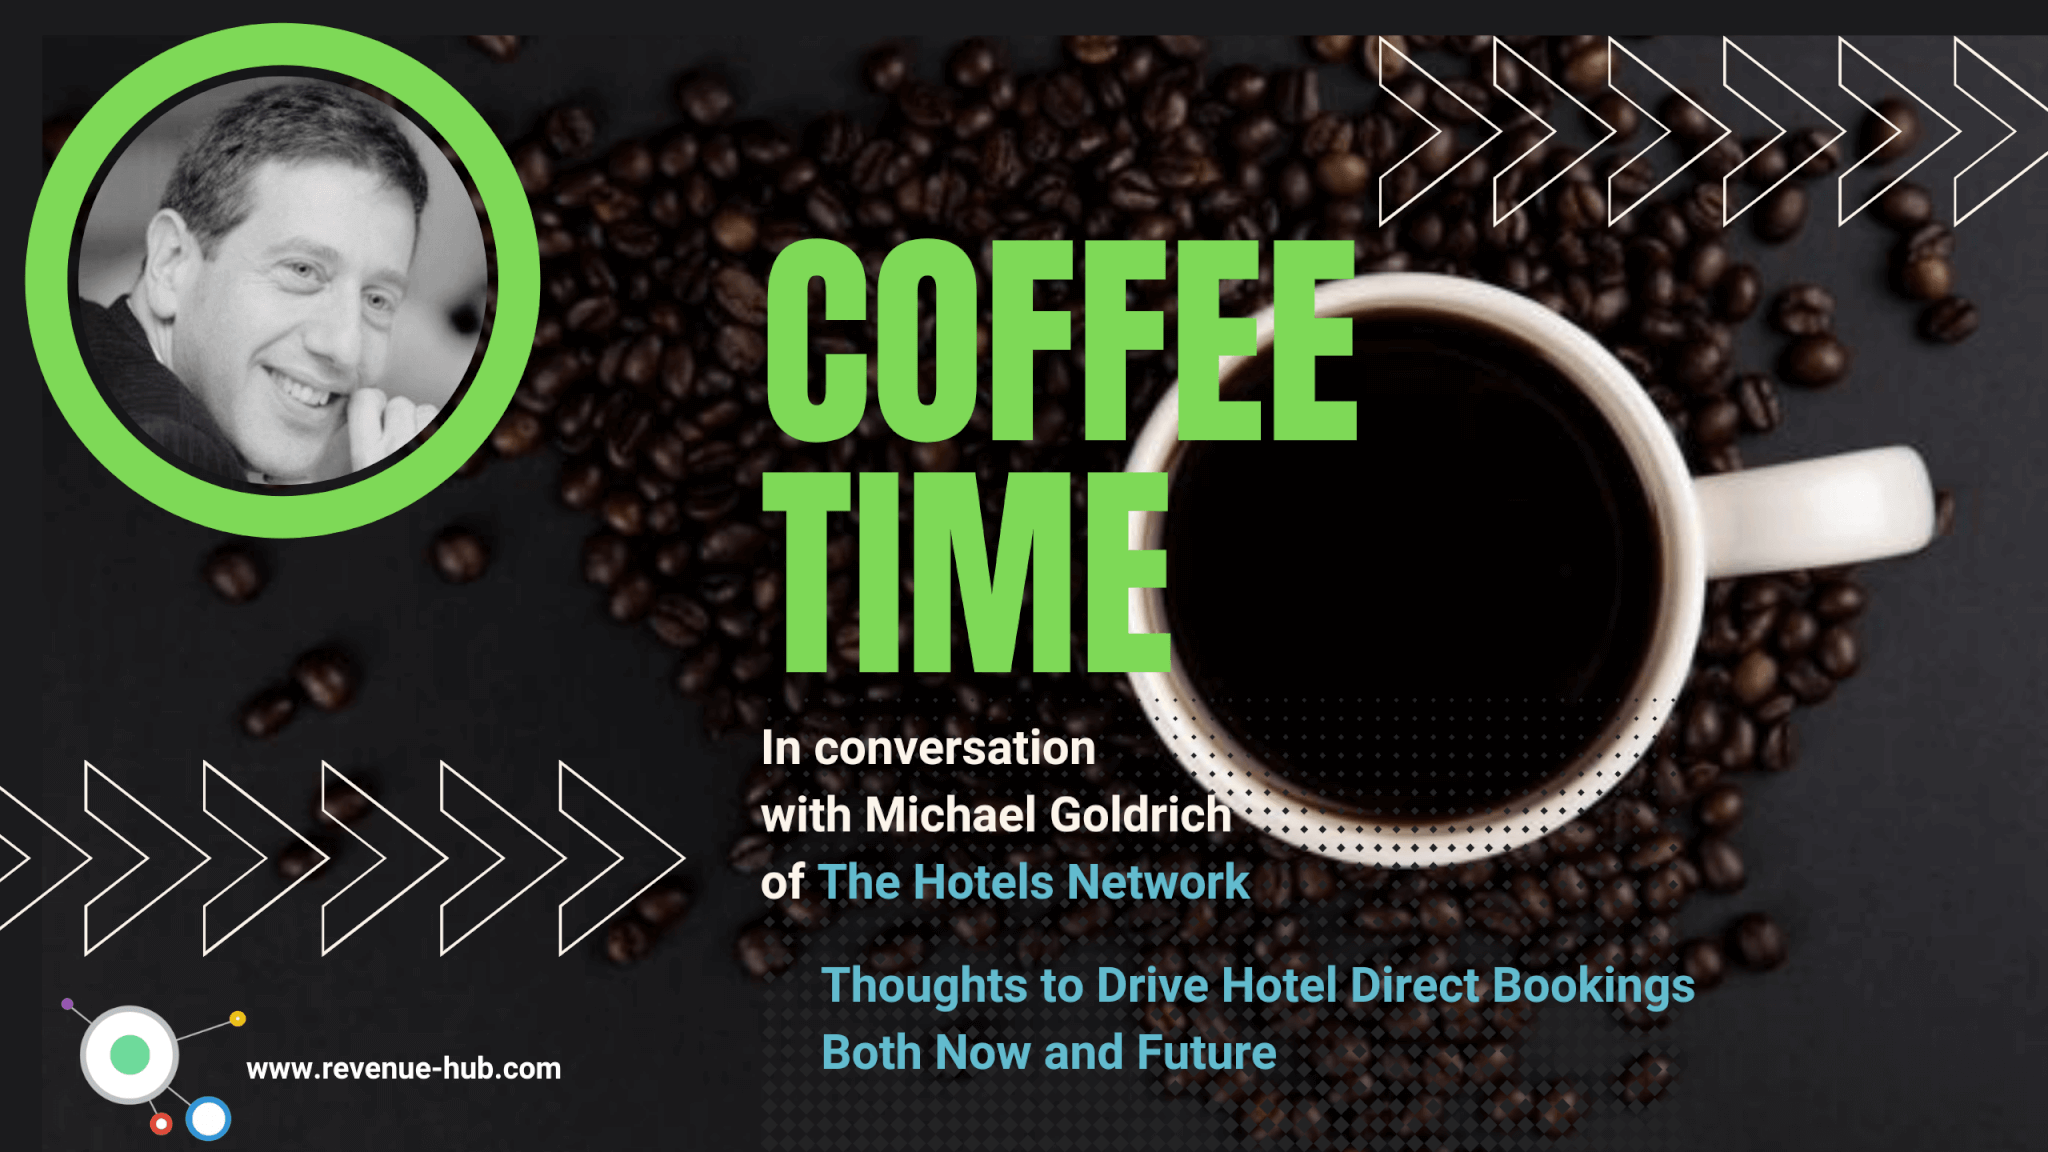 michael goldrich the hotels network video interview thumbnail for coffee time discussion about thoughts on hotel direct bookings now and future